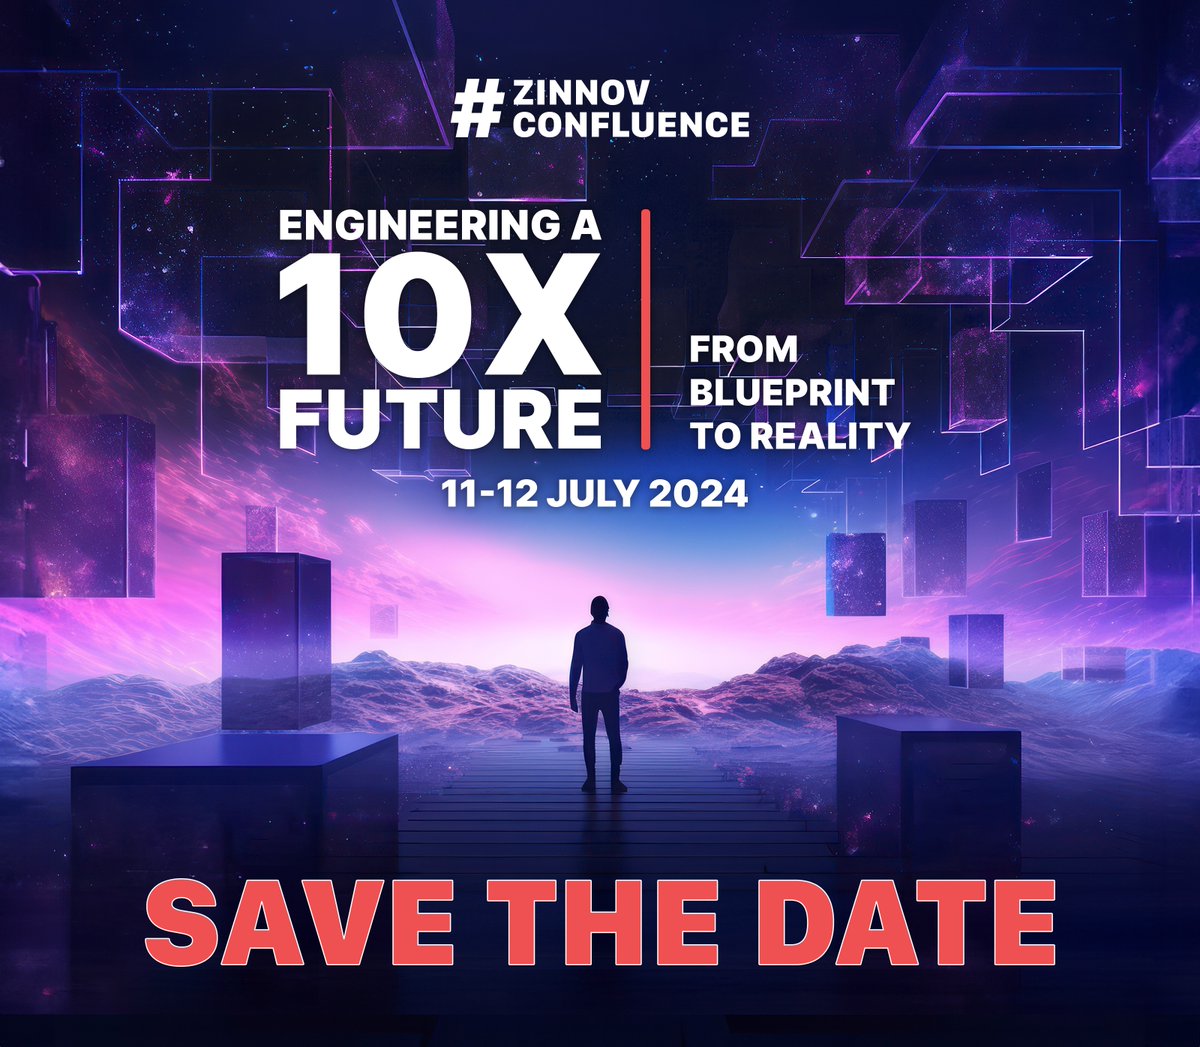 It's that time of the year again! 🎉 The 17th edition of #ZinnovConfluence - the global tech conference you've been eagerly awaiting is now open for registrations. 🔓 Mark your calendars for 11th and 12th July 2024. Register now: bit.ly/3TY2wsF